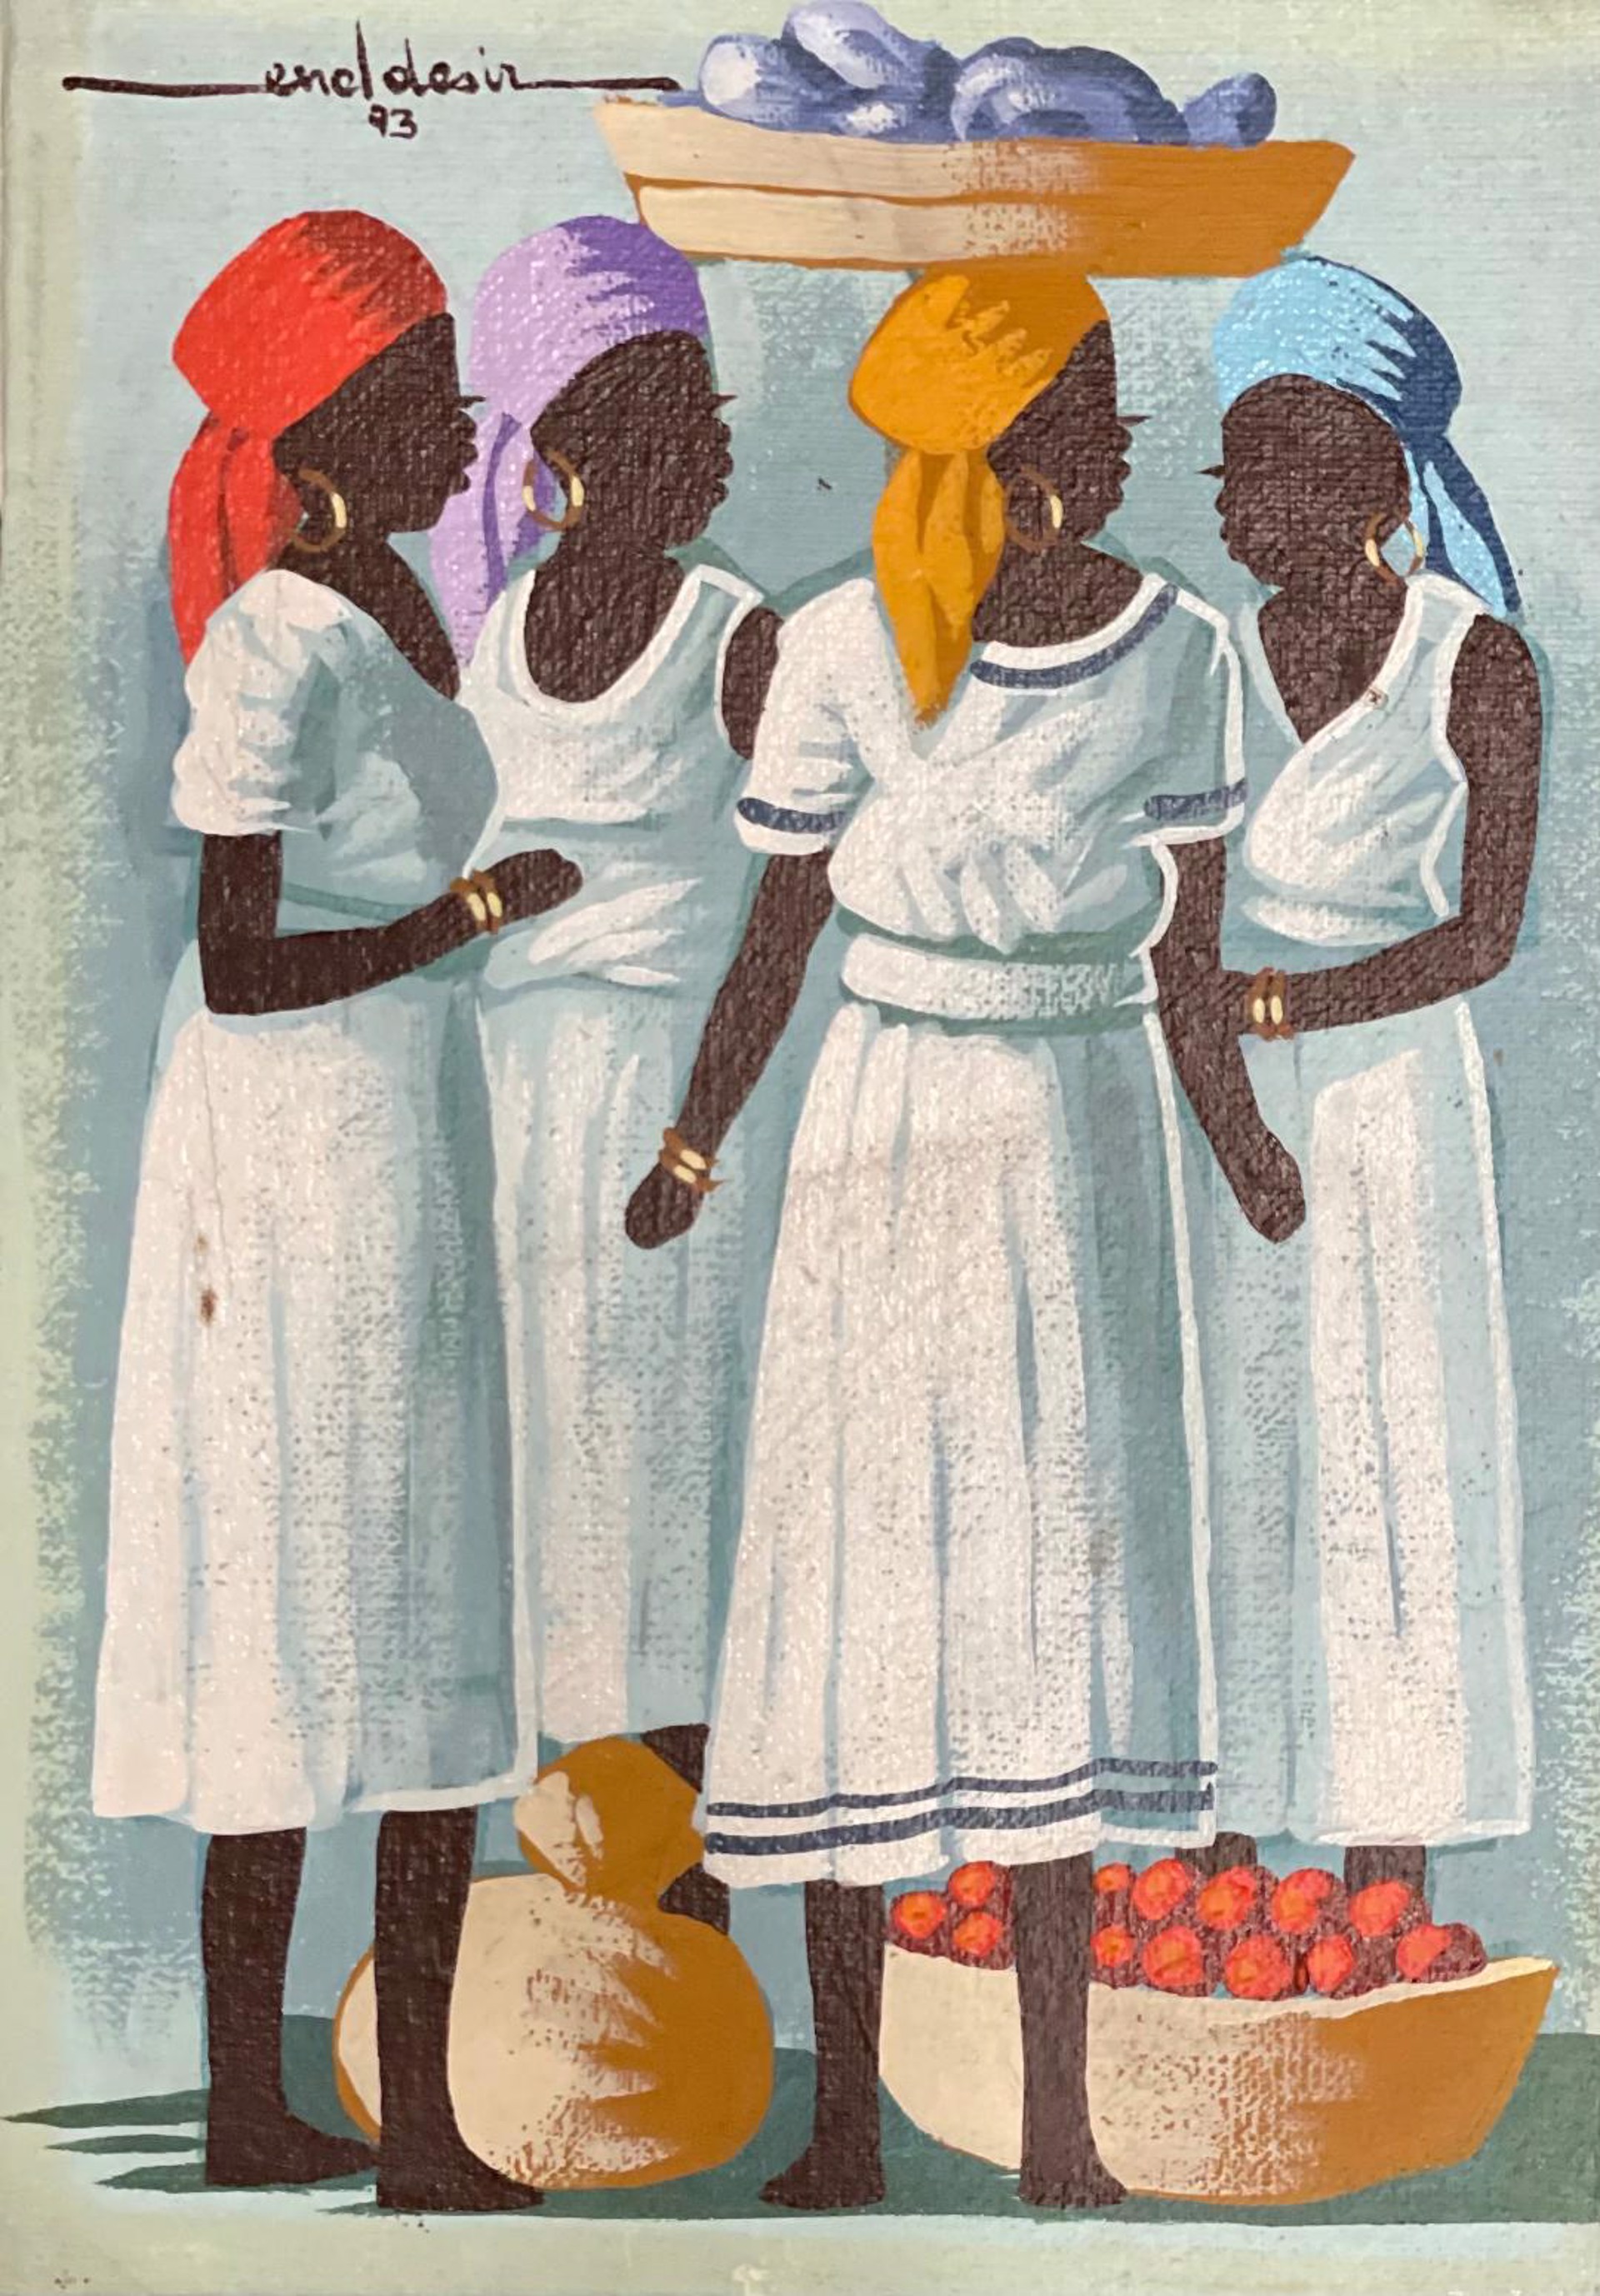 A Day at the Market #1MFN by Enel Desir (Haitian, b. 1966)